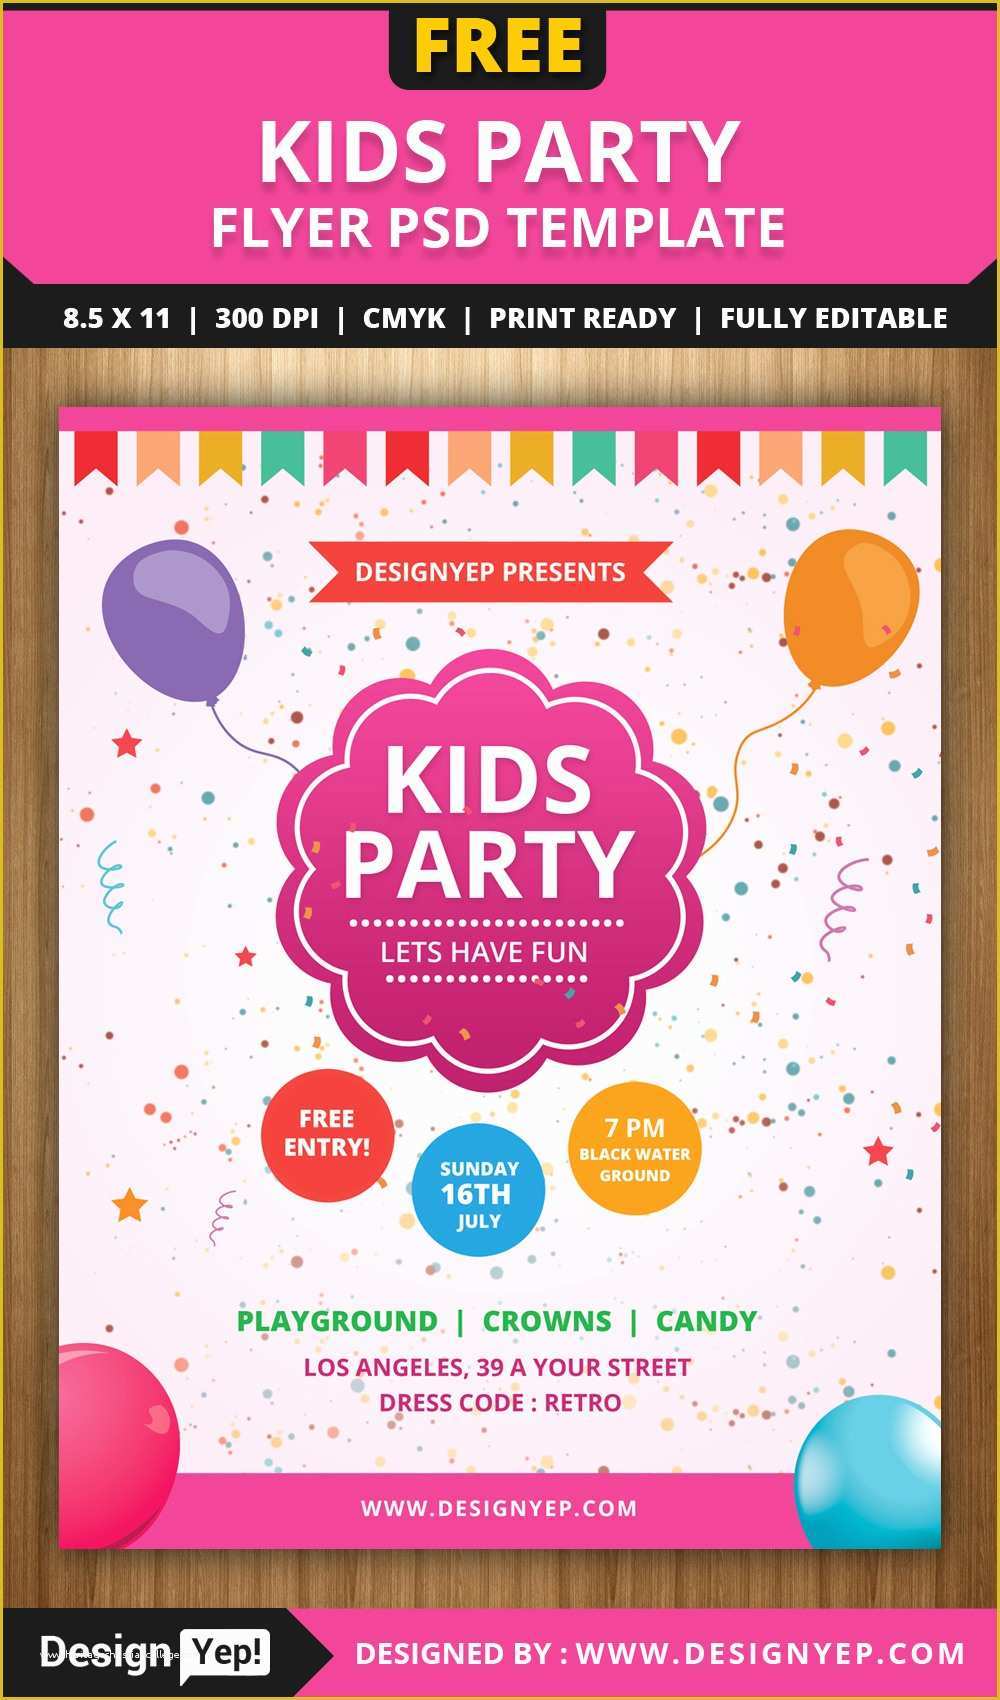 Party Flyer Template Free Of Free Kids Party Flyer Psd Template Designyep